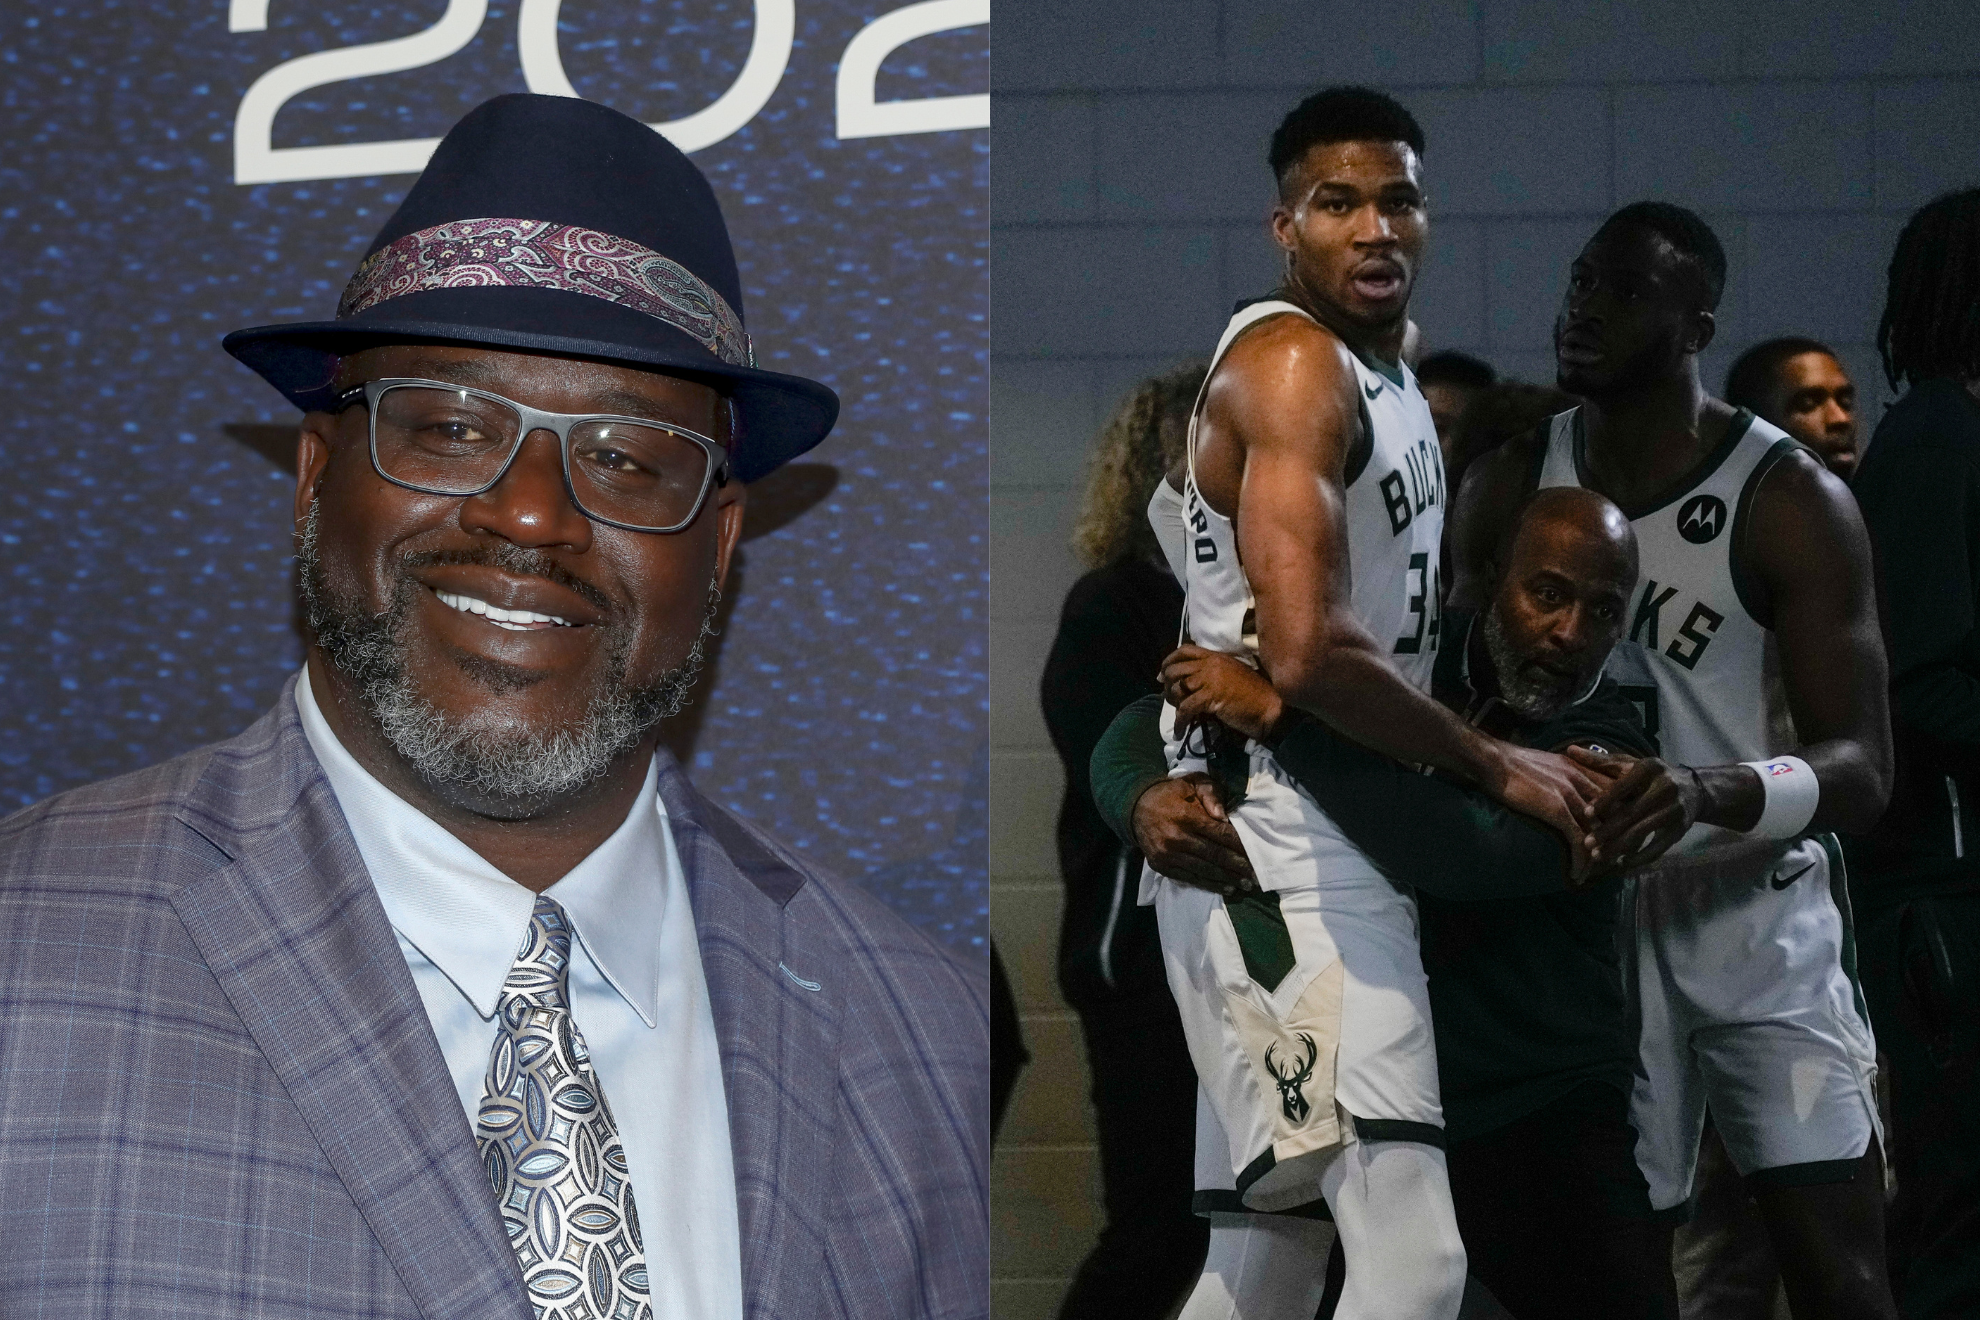 Shaquille ONeal weighs in on Giannis Antetokounmpos behavior.